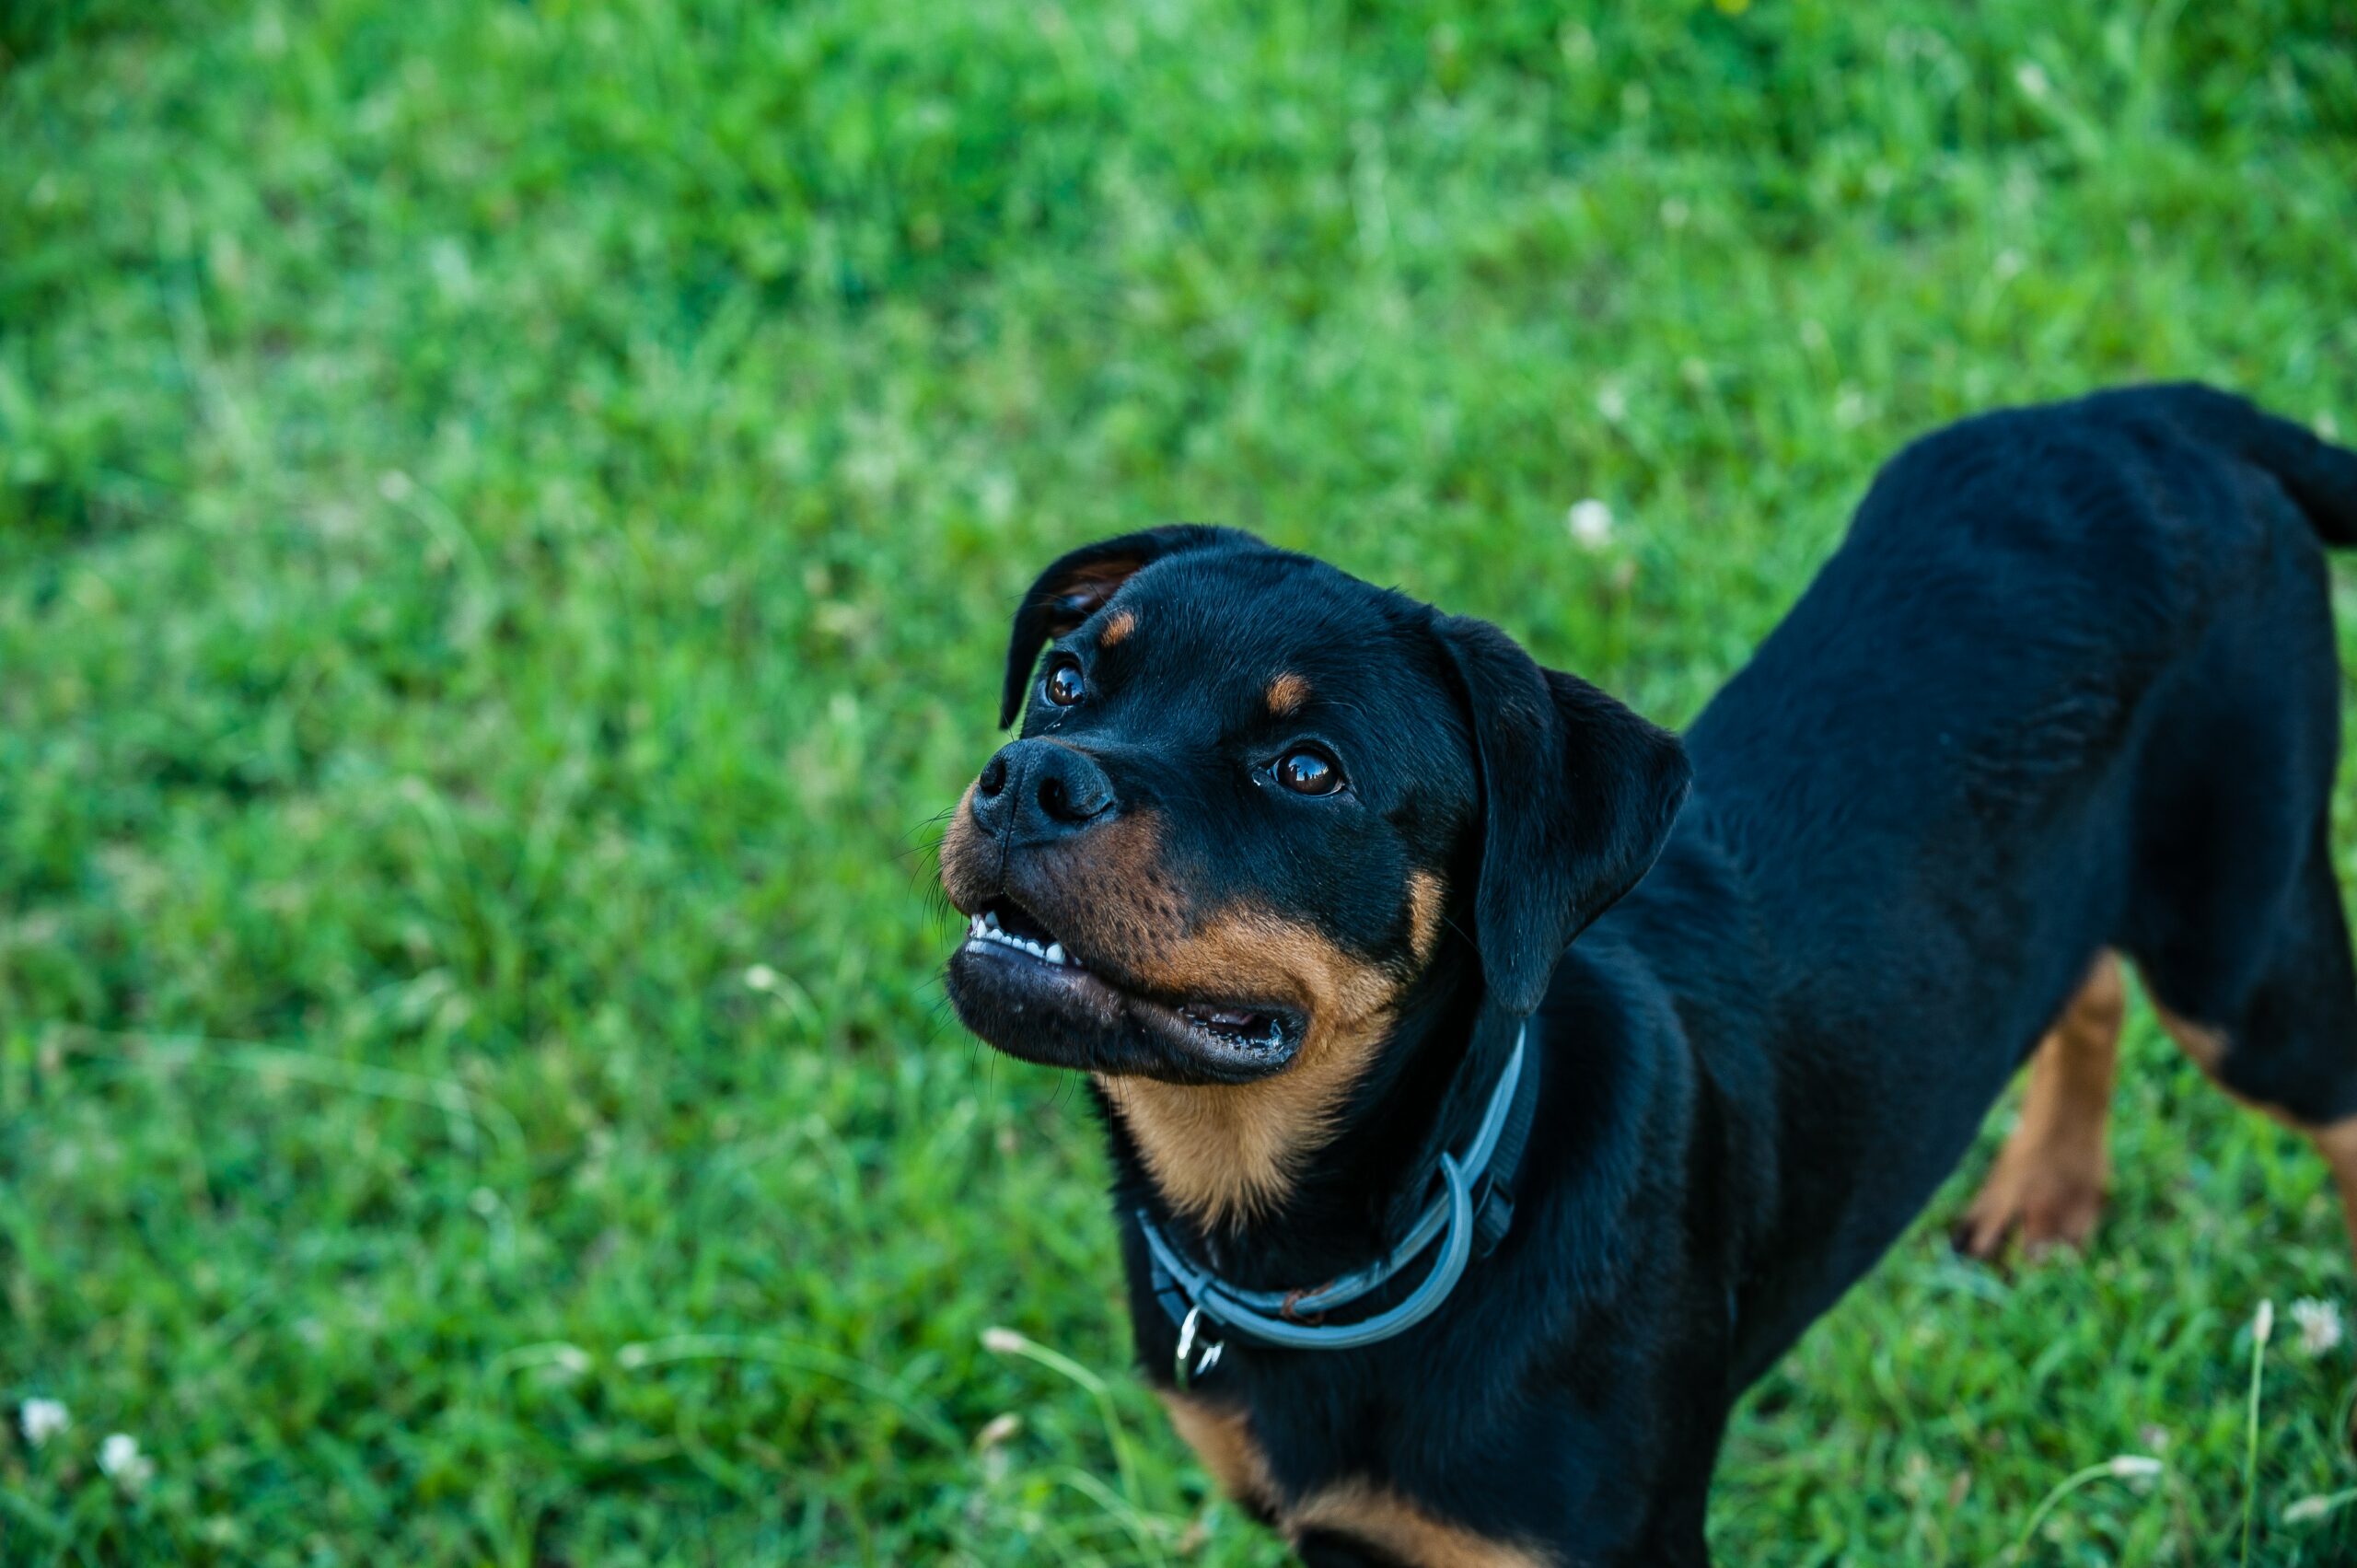 at what age Rottweiler become aggressive